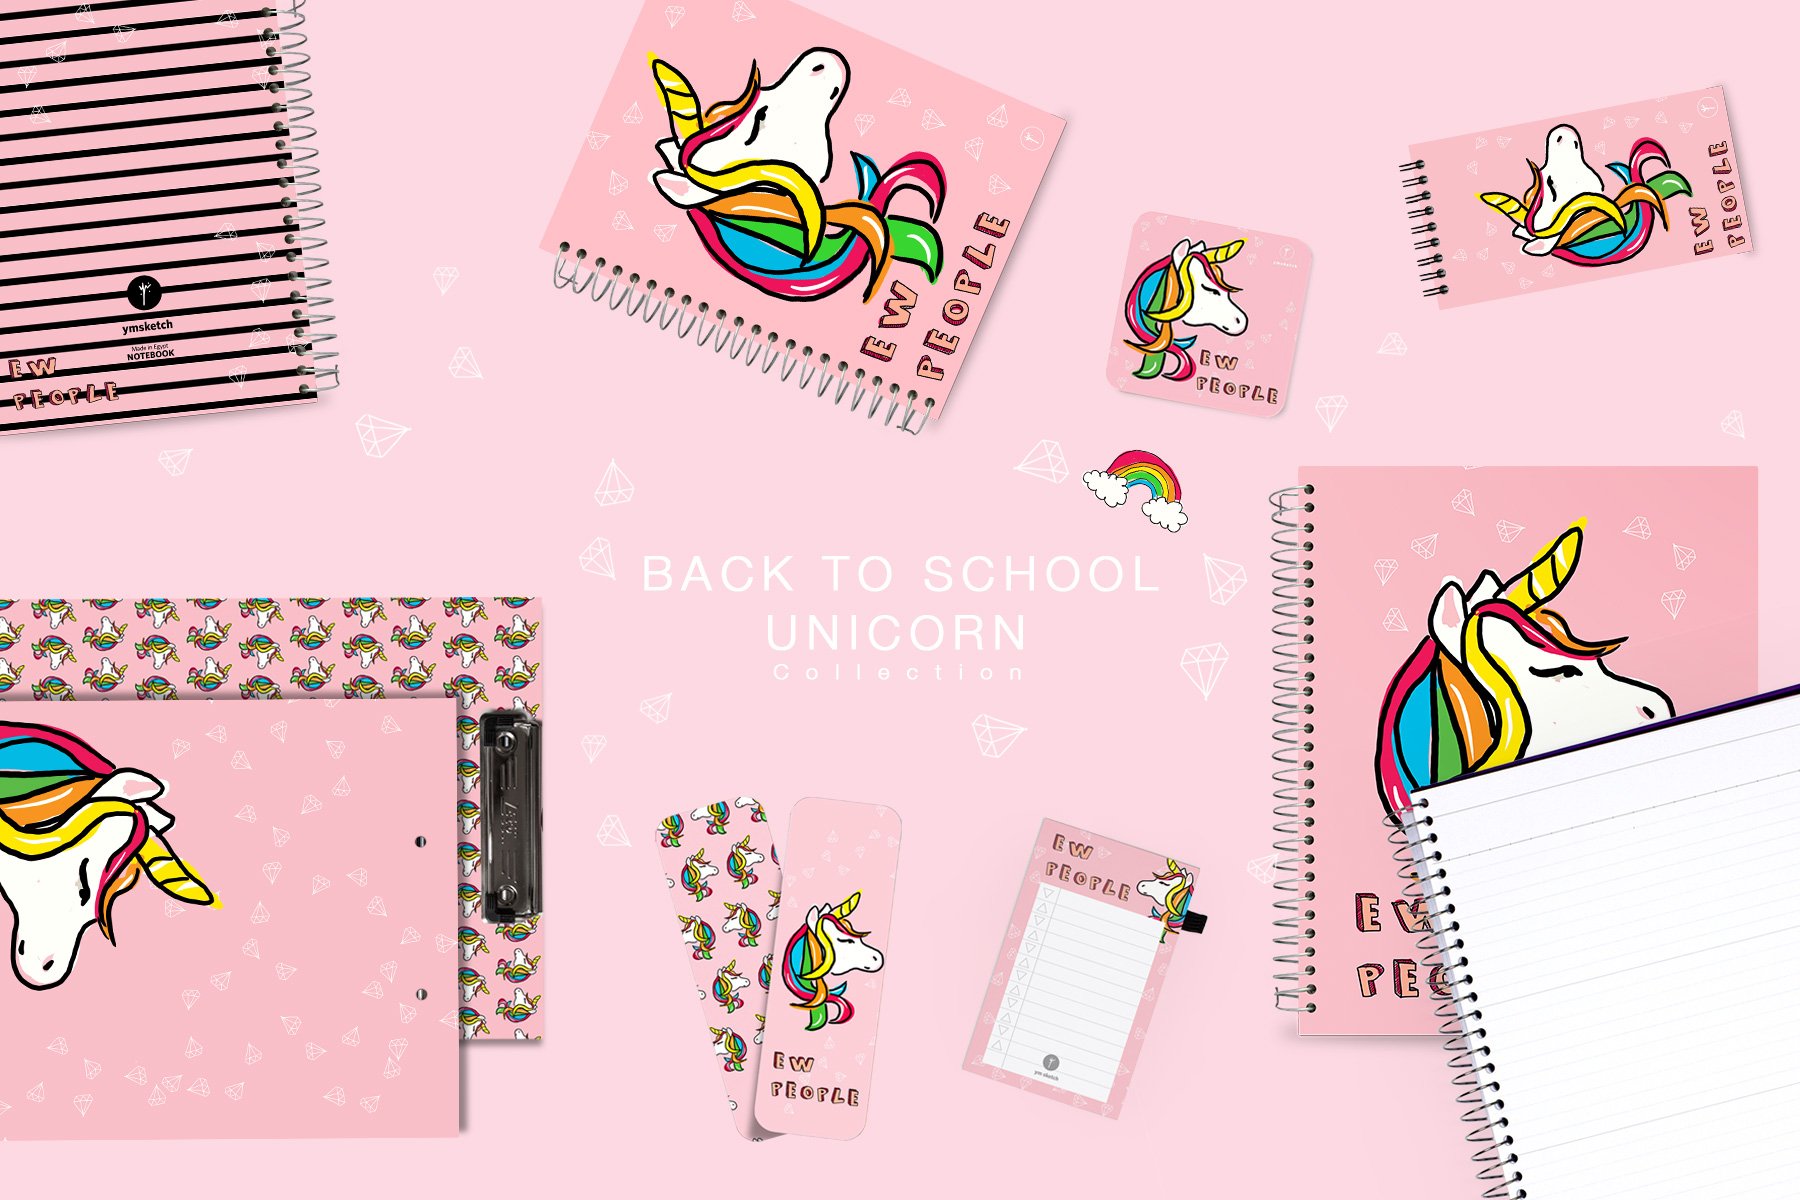 Unicorn back to school collection